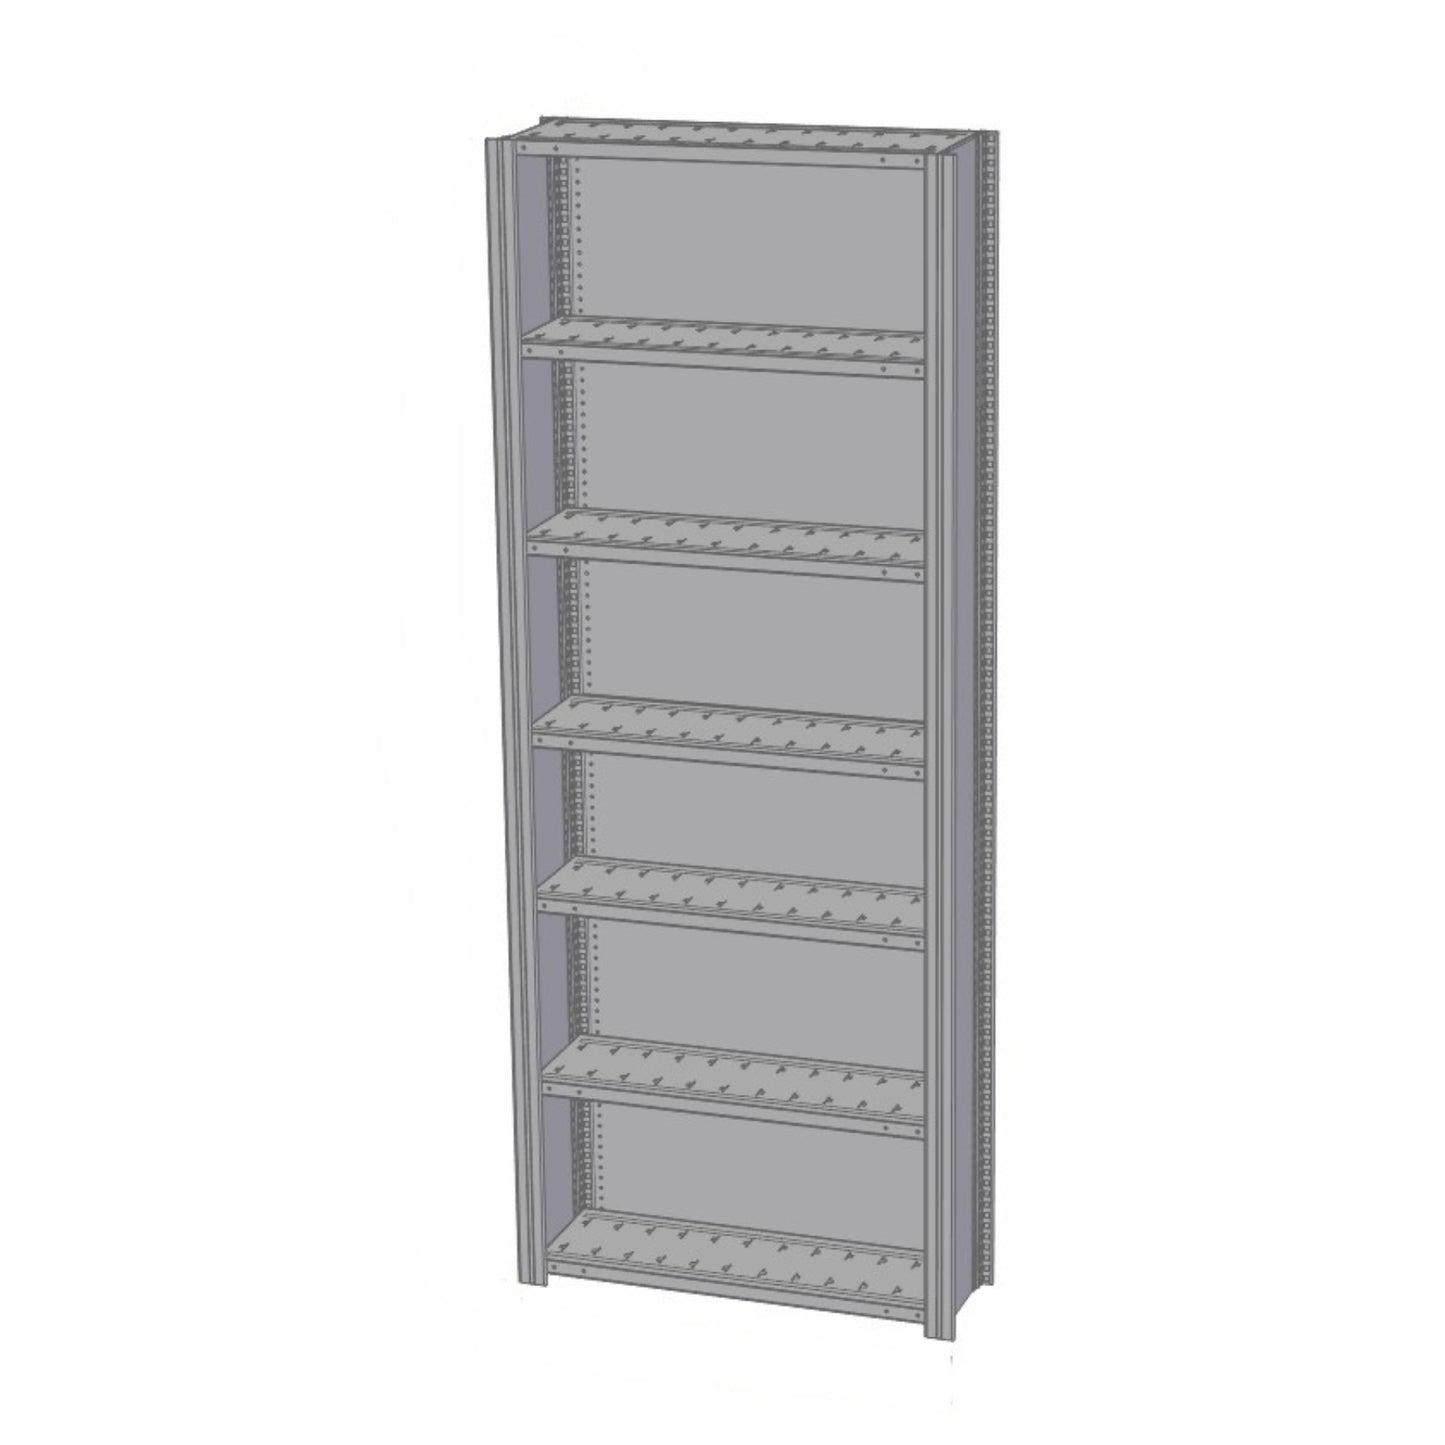 Shelving system 75 height x 36 width x 24 depth | Option: Open / Closed